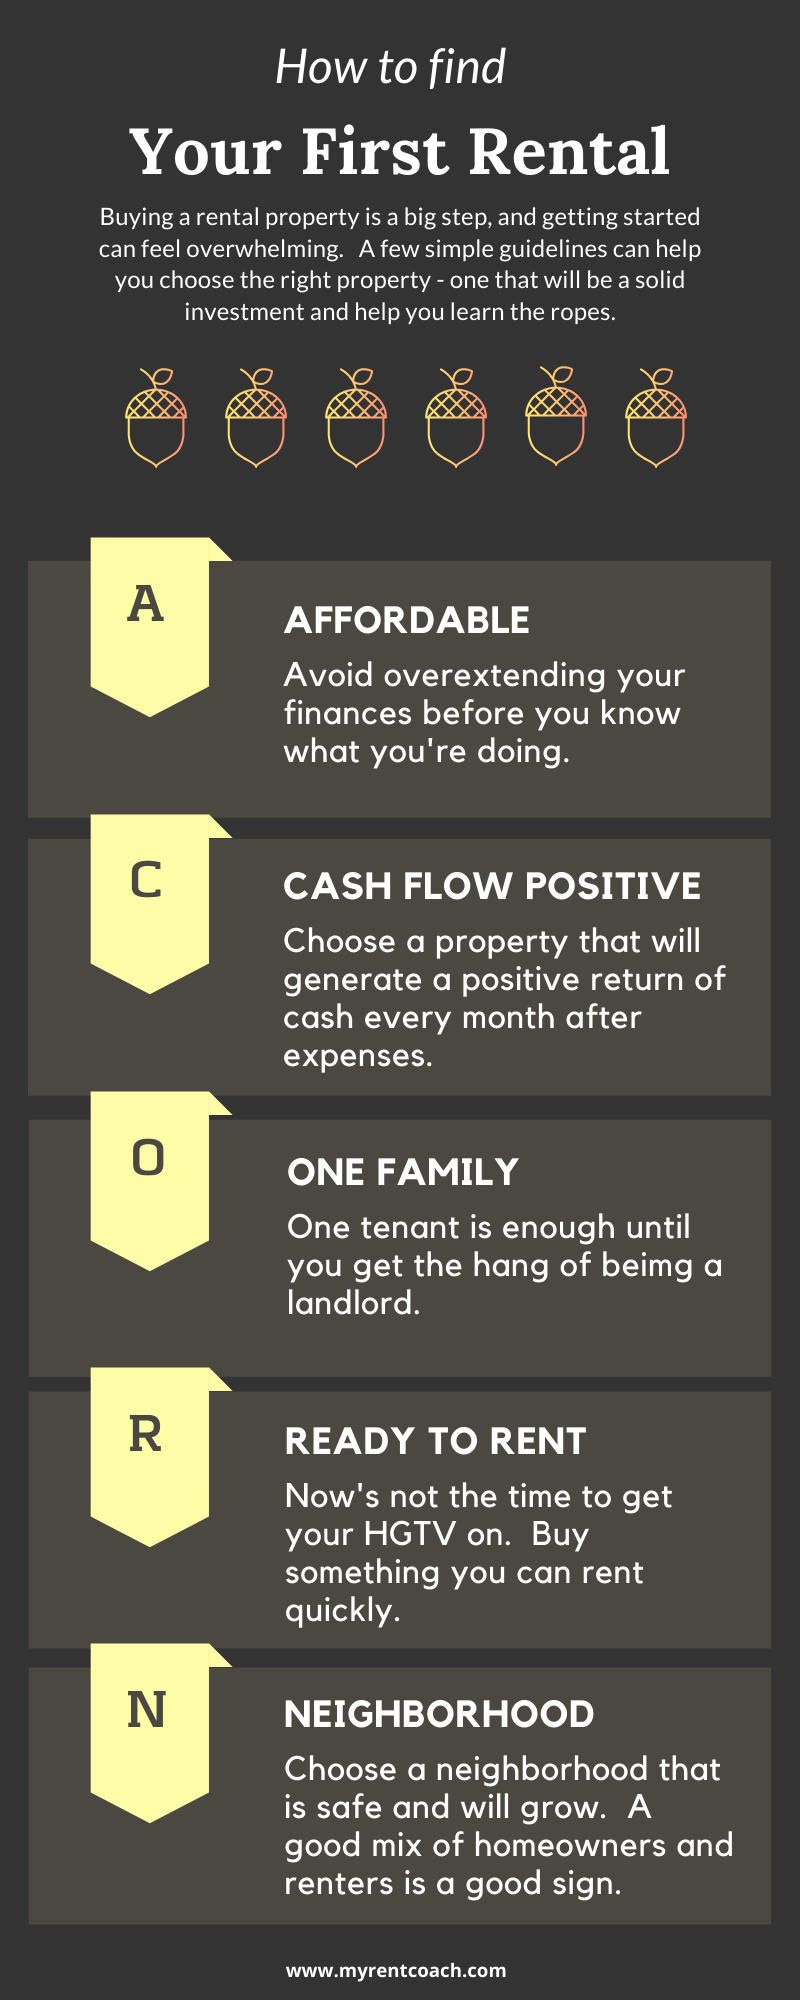 Using the ACORN Method to Find Your First Rental Property